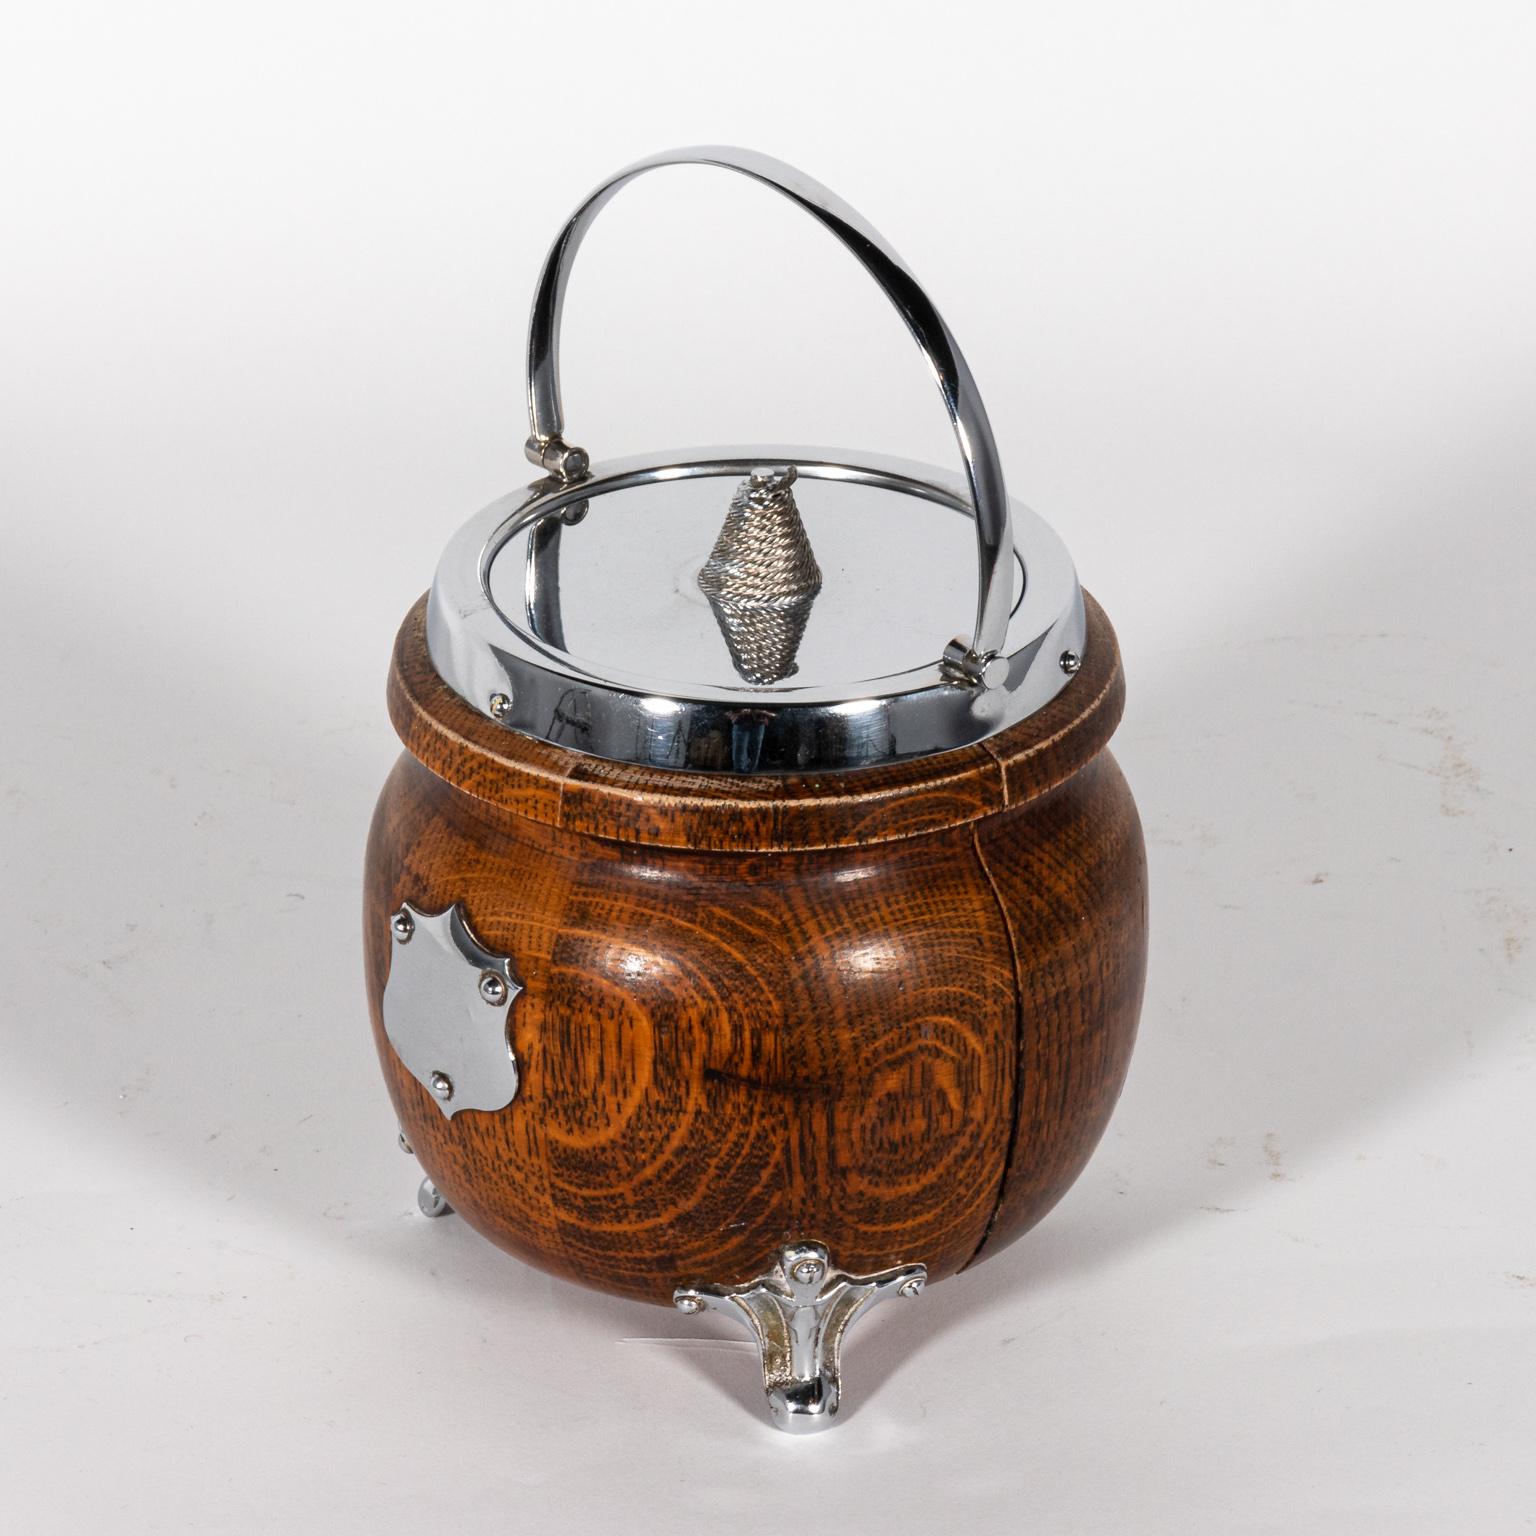 Oak and silver ice bucket with handle and lid. The piece also features a shield motif on the front. Please note of wear consistent with age including minor surface scratches.